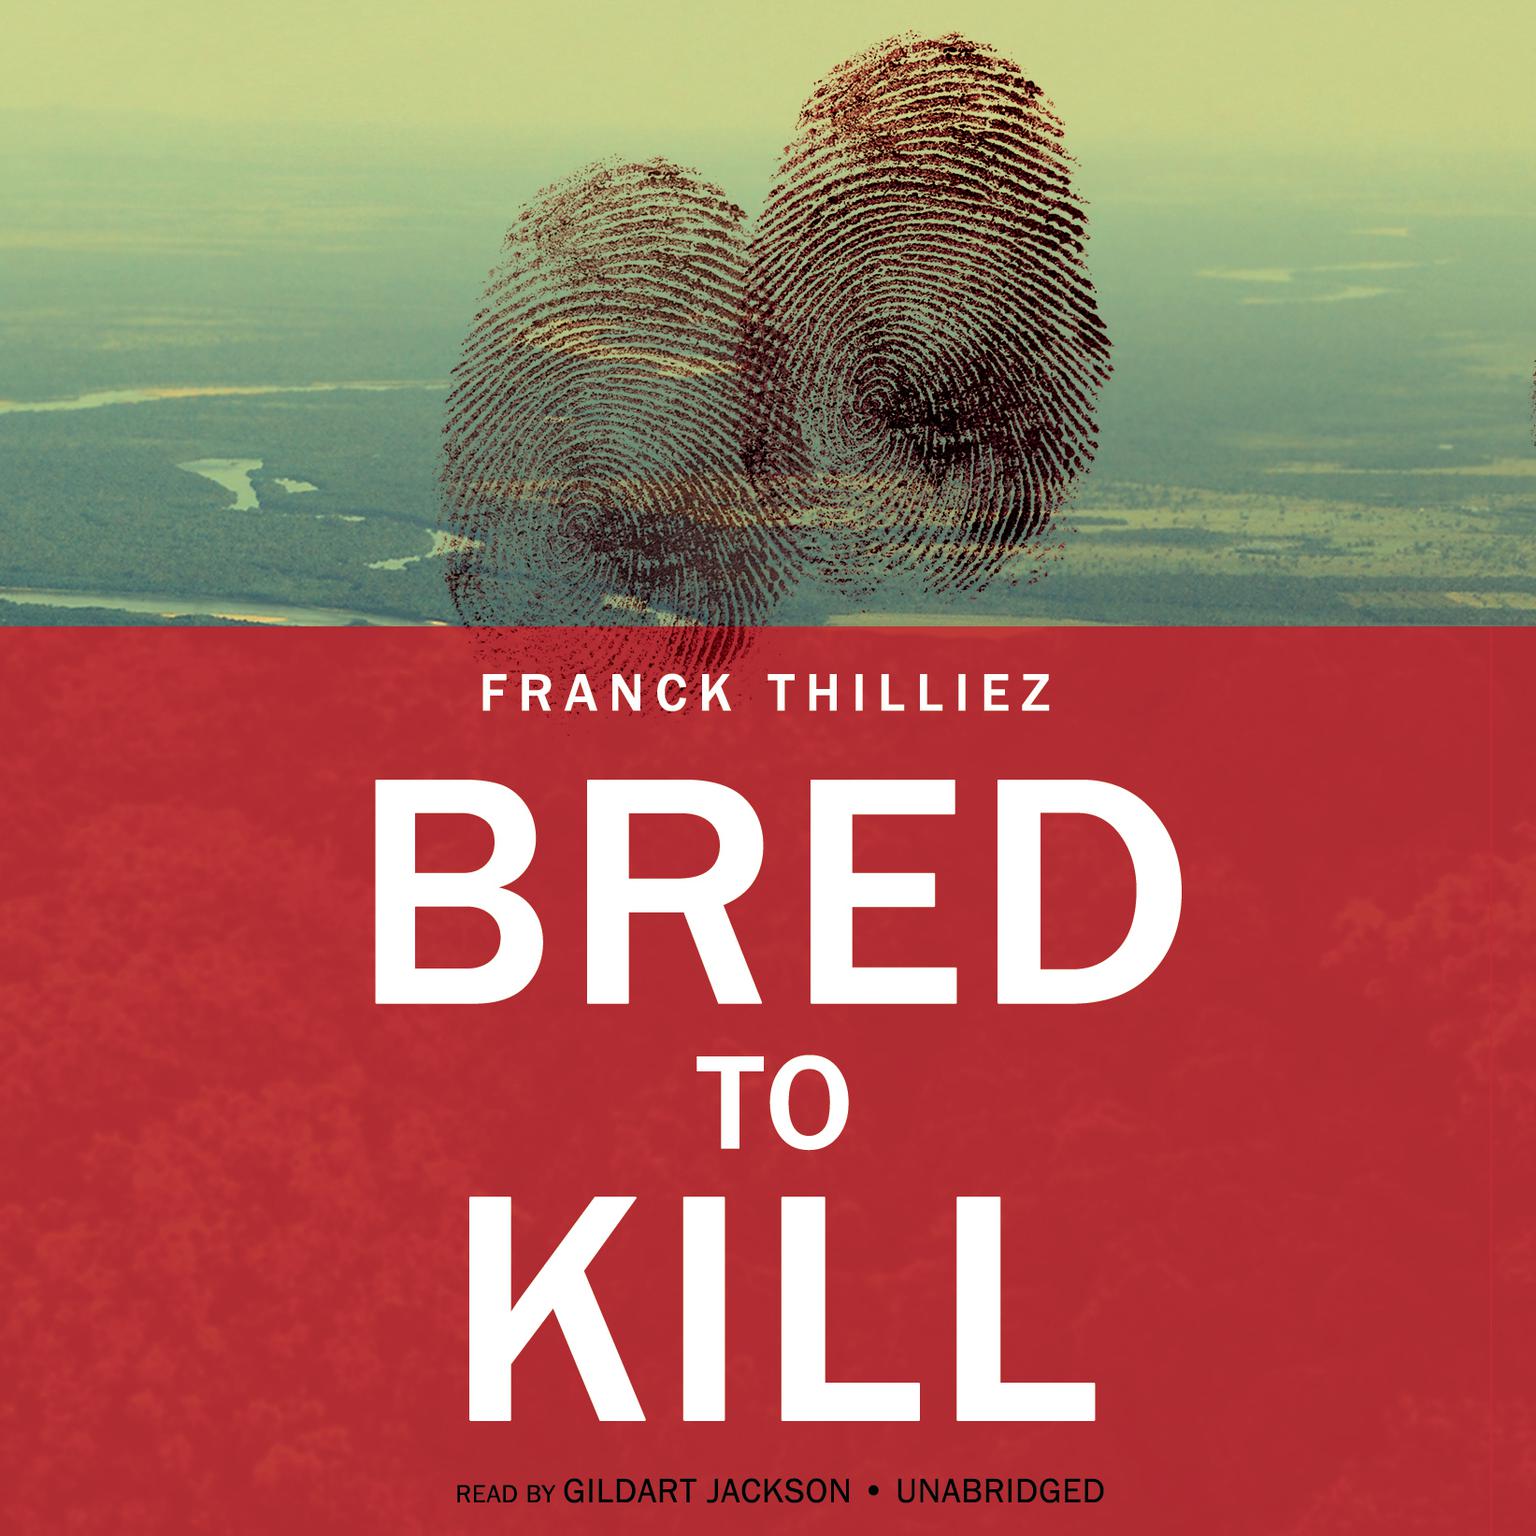 Bred to Kill Audiobook, by Franck Thilliez